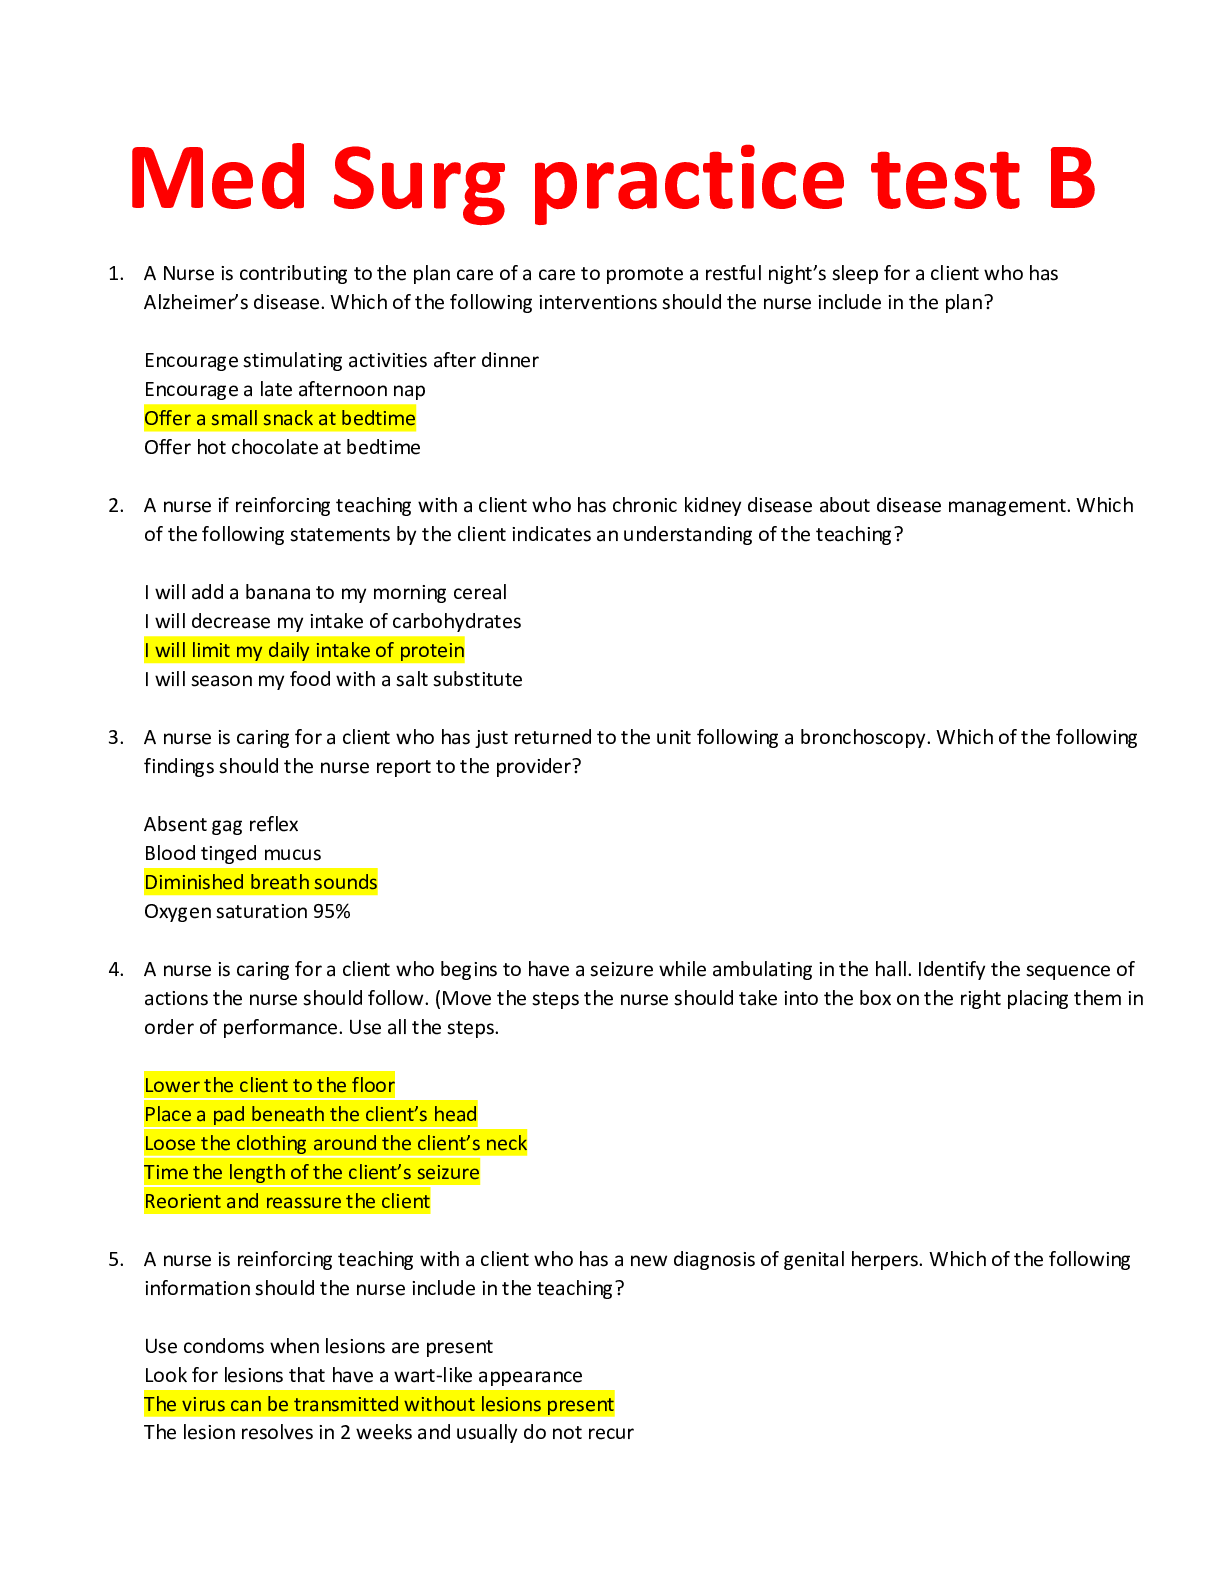 med-surg-practice-test-b-with-questions-and-latest-answers-latest-update